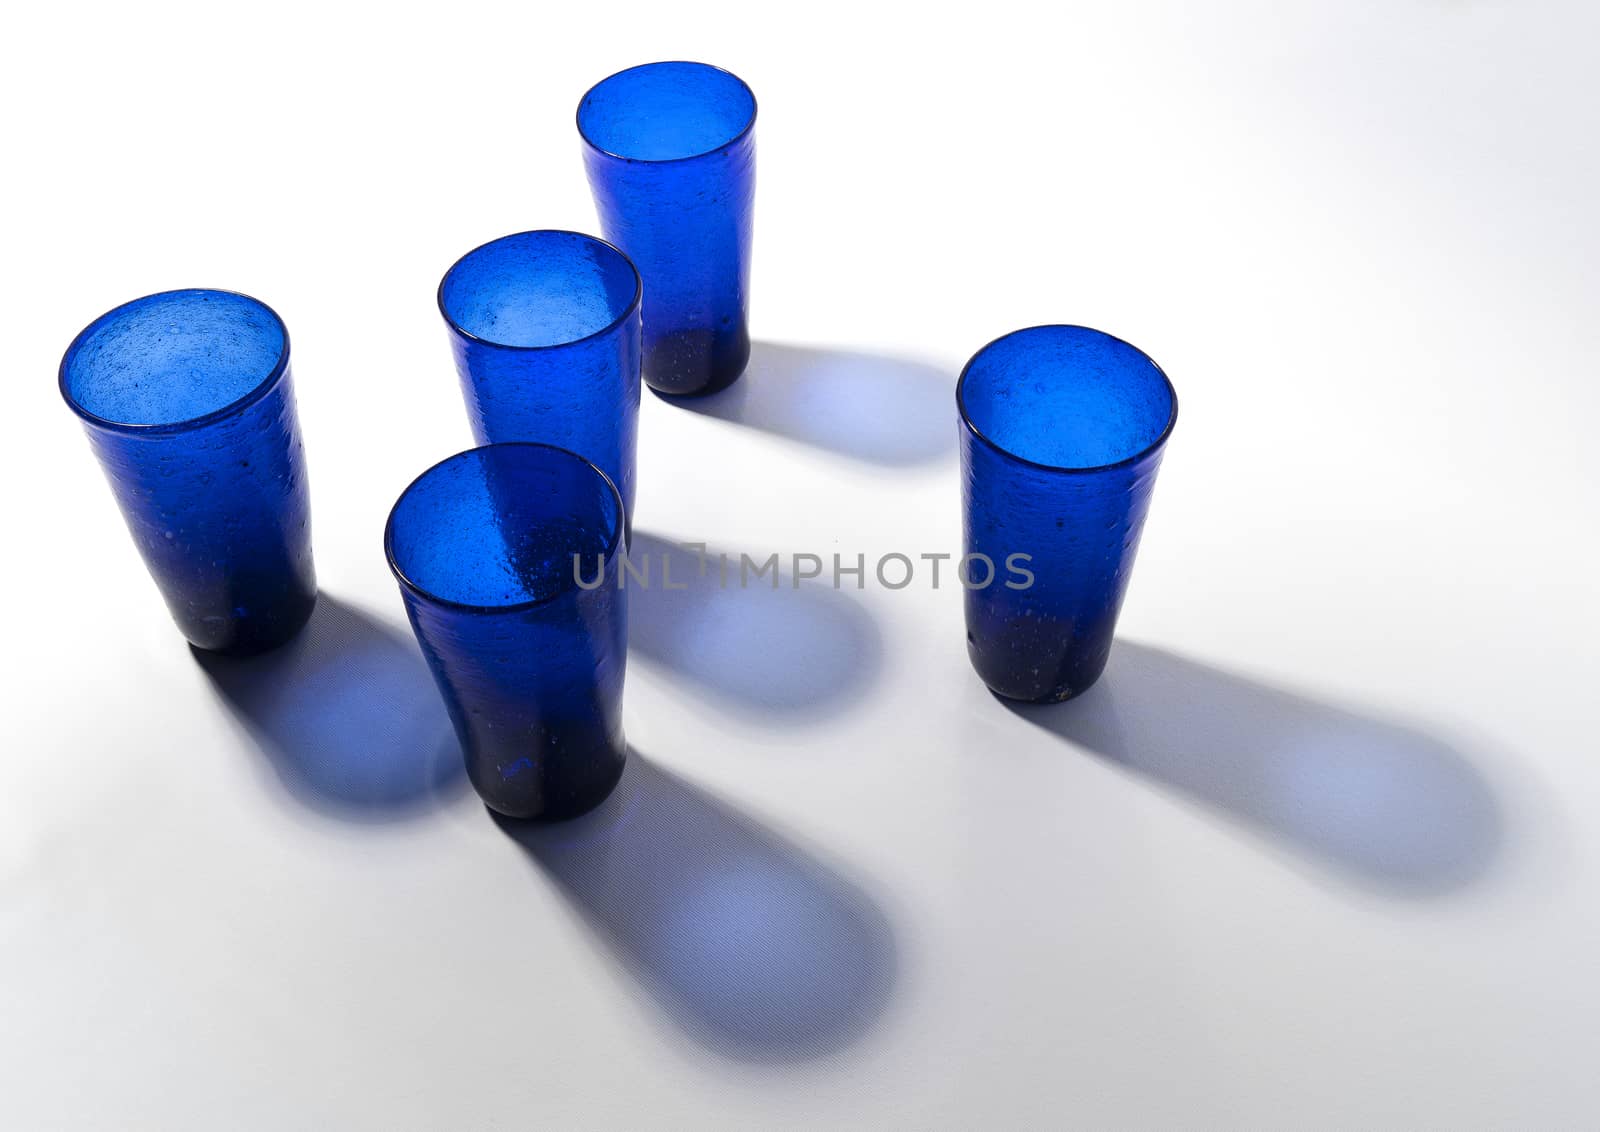 Some blue glasses on a white surface